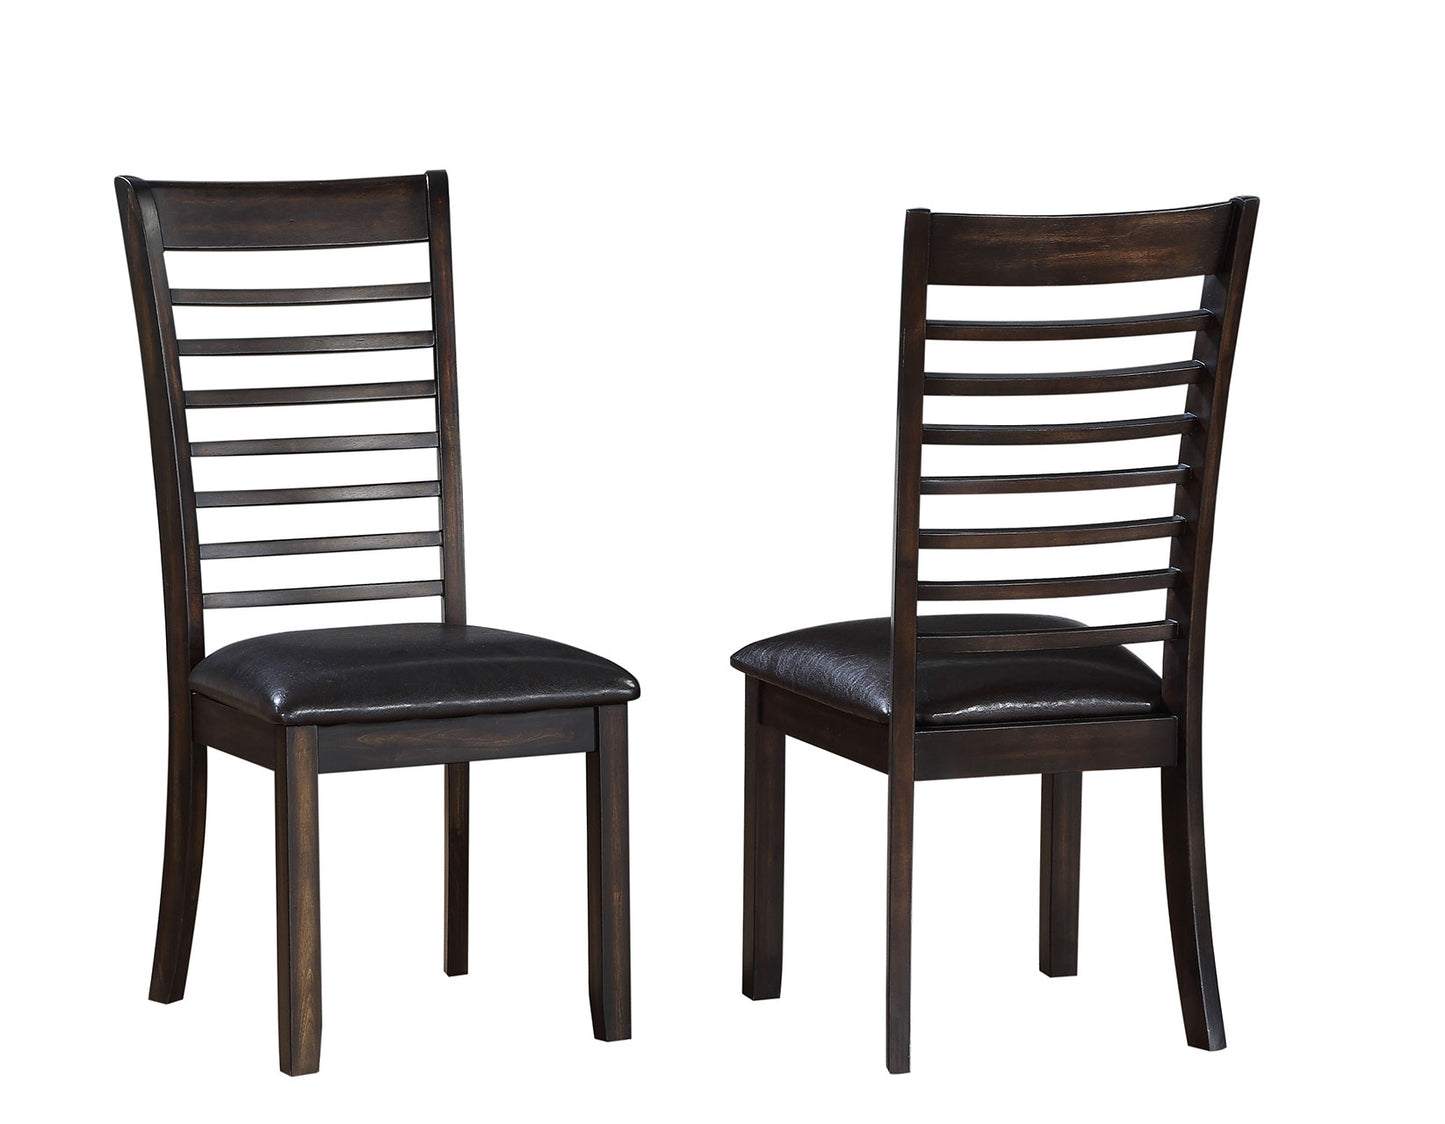 Ally 5 Piece Set
(Table & 4 Side Chairs)